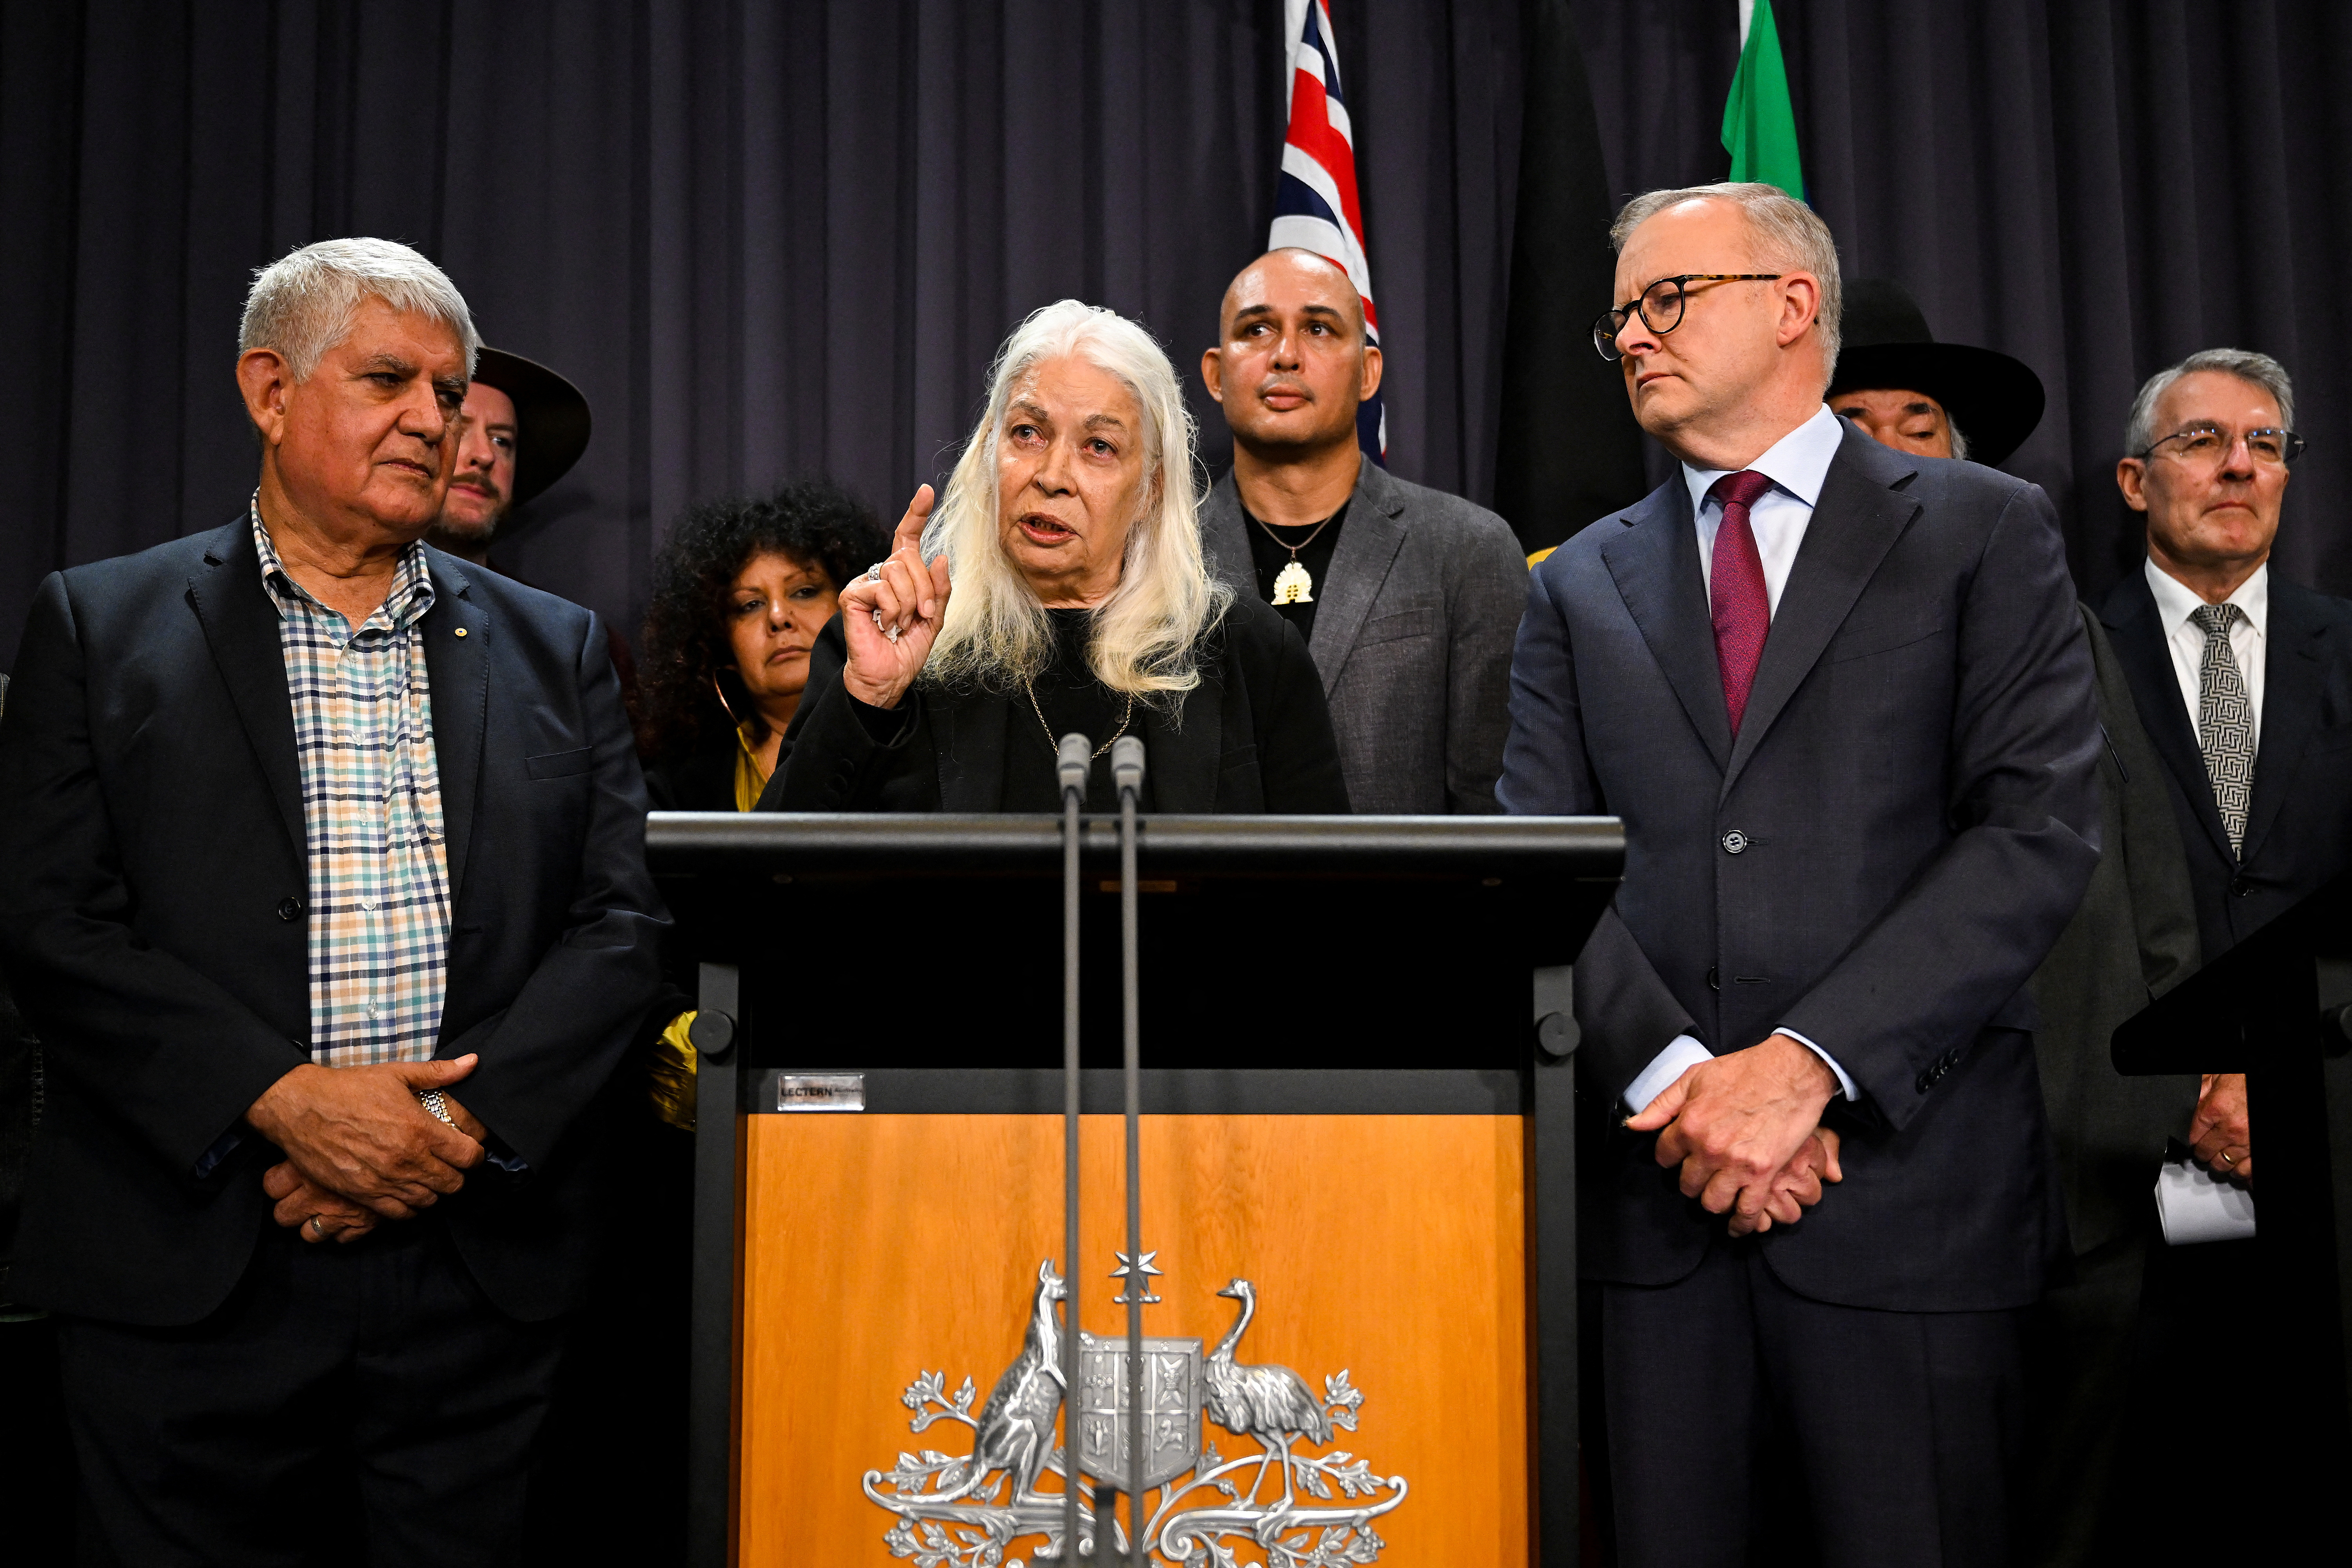 A member of the First Nations Referendum Working Group Marcia Langton speaks to the media during a news conference at Parliament House in Canberra